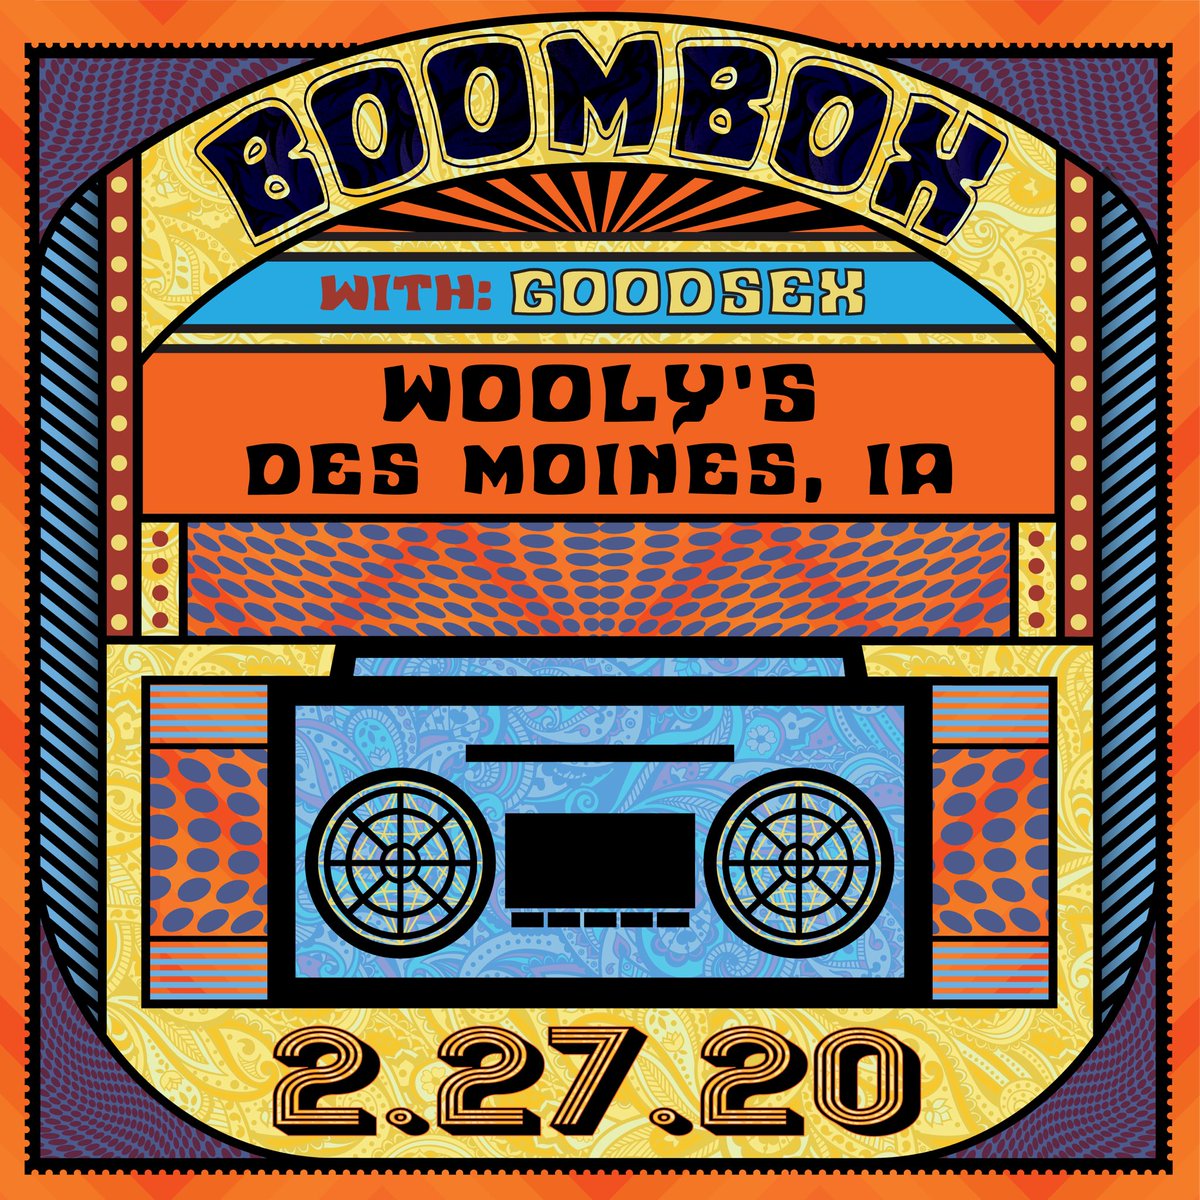 headed out to Des Moines, Iowa on 2.27 to set up the room for @thisisboombox at Wooly’s ... we bringing some Chicago heat for ya’ll, much love! •
•
•
#desmoinesmusic #iowamusic #thisisboombox #dancewithus #showannouncement